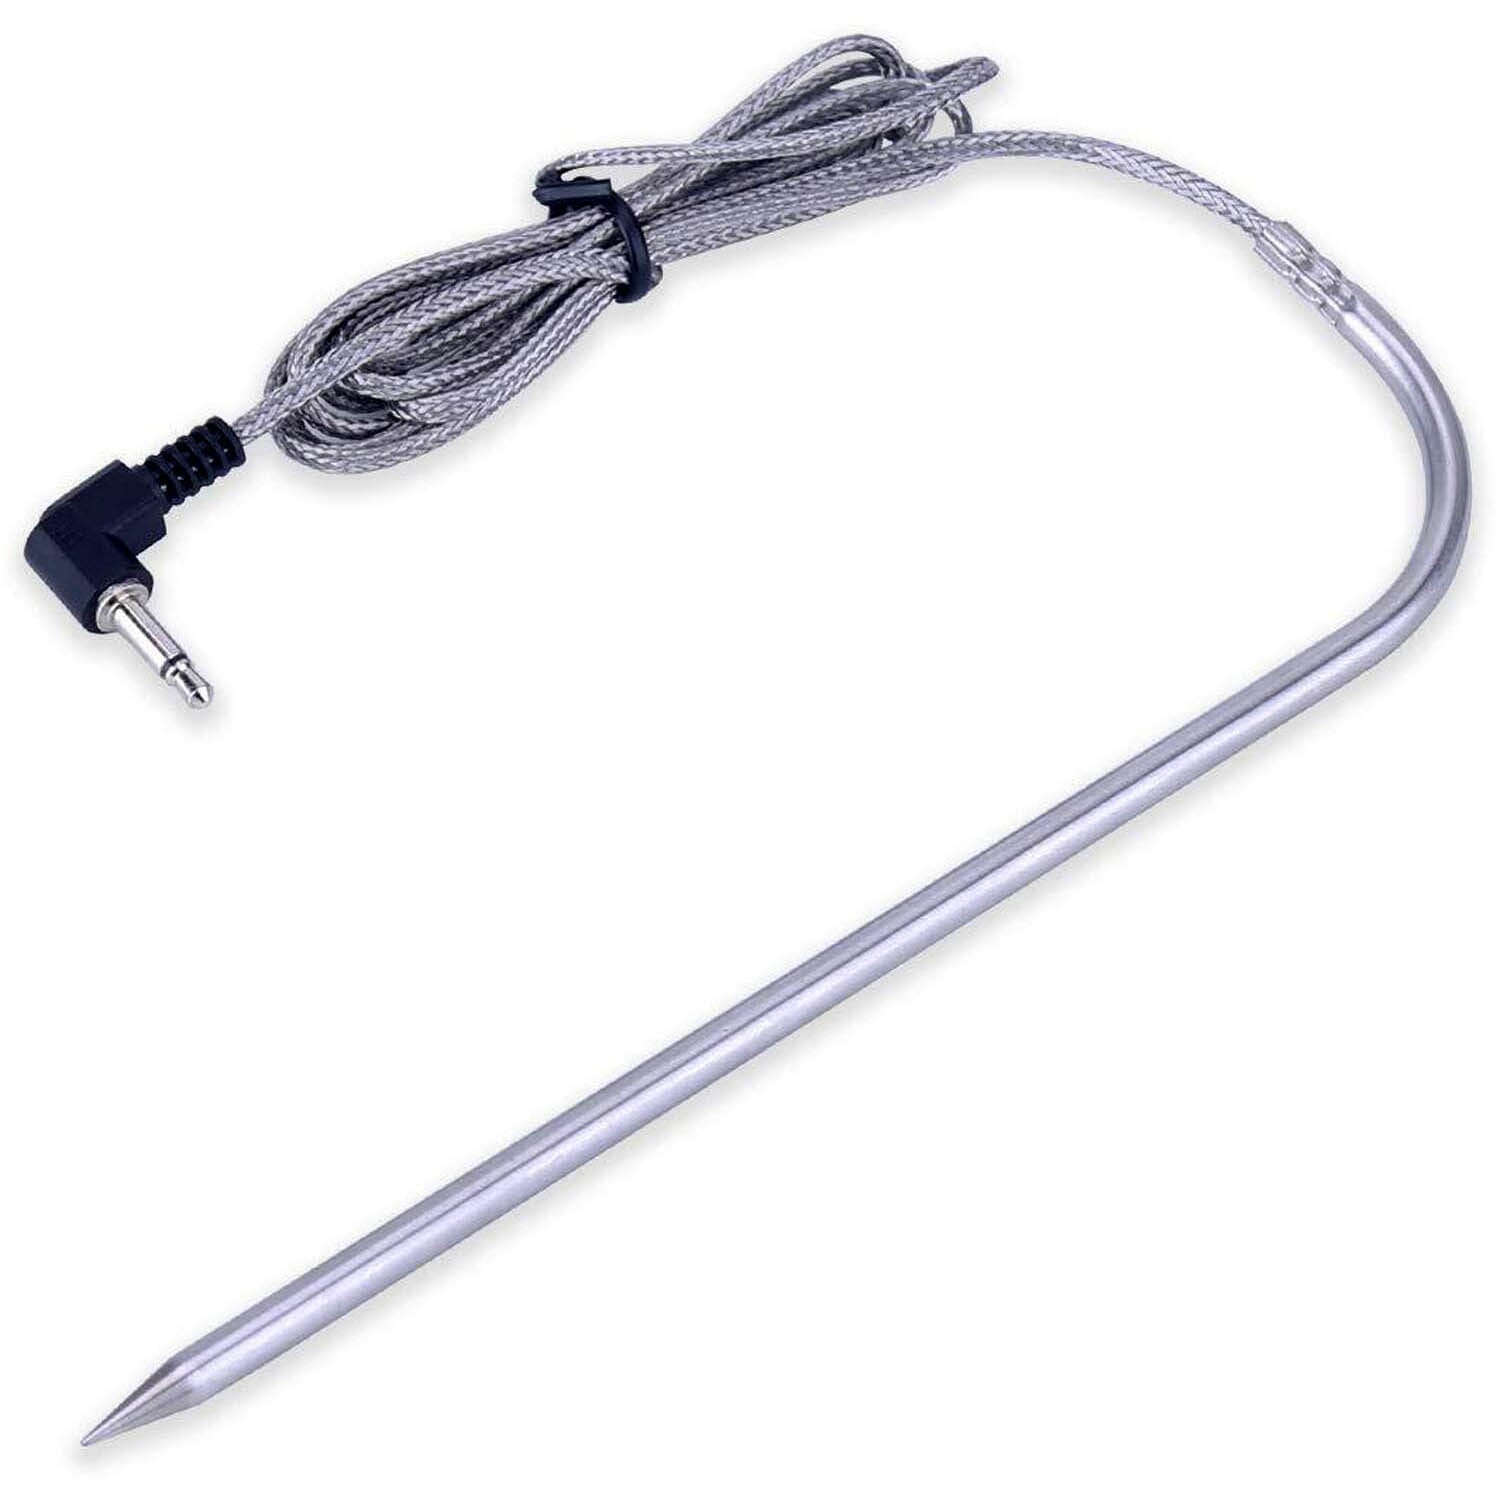 Pit Boss Meat Temperature Sensor Probe Curved, 50152